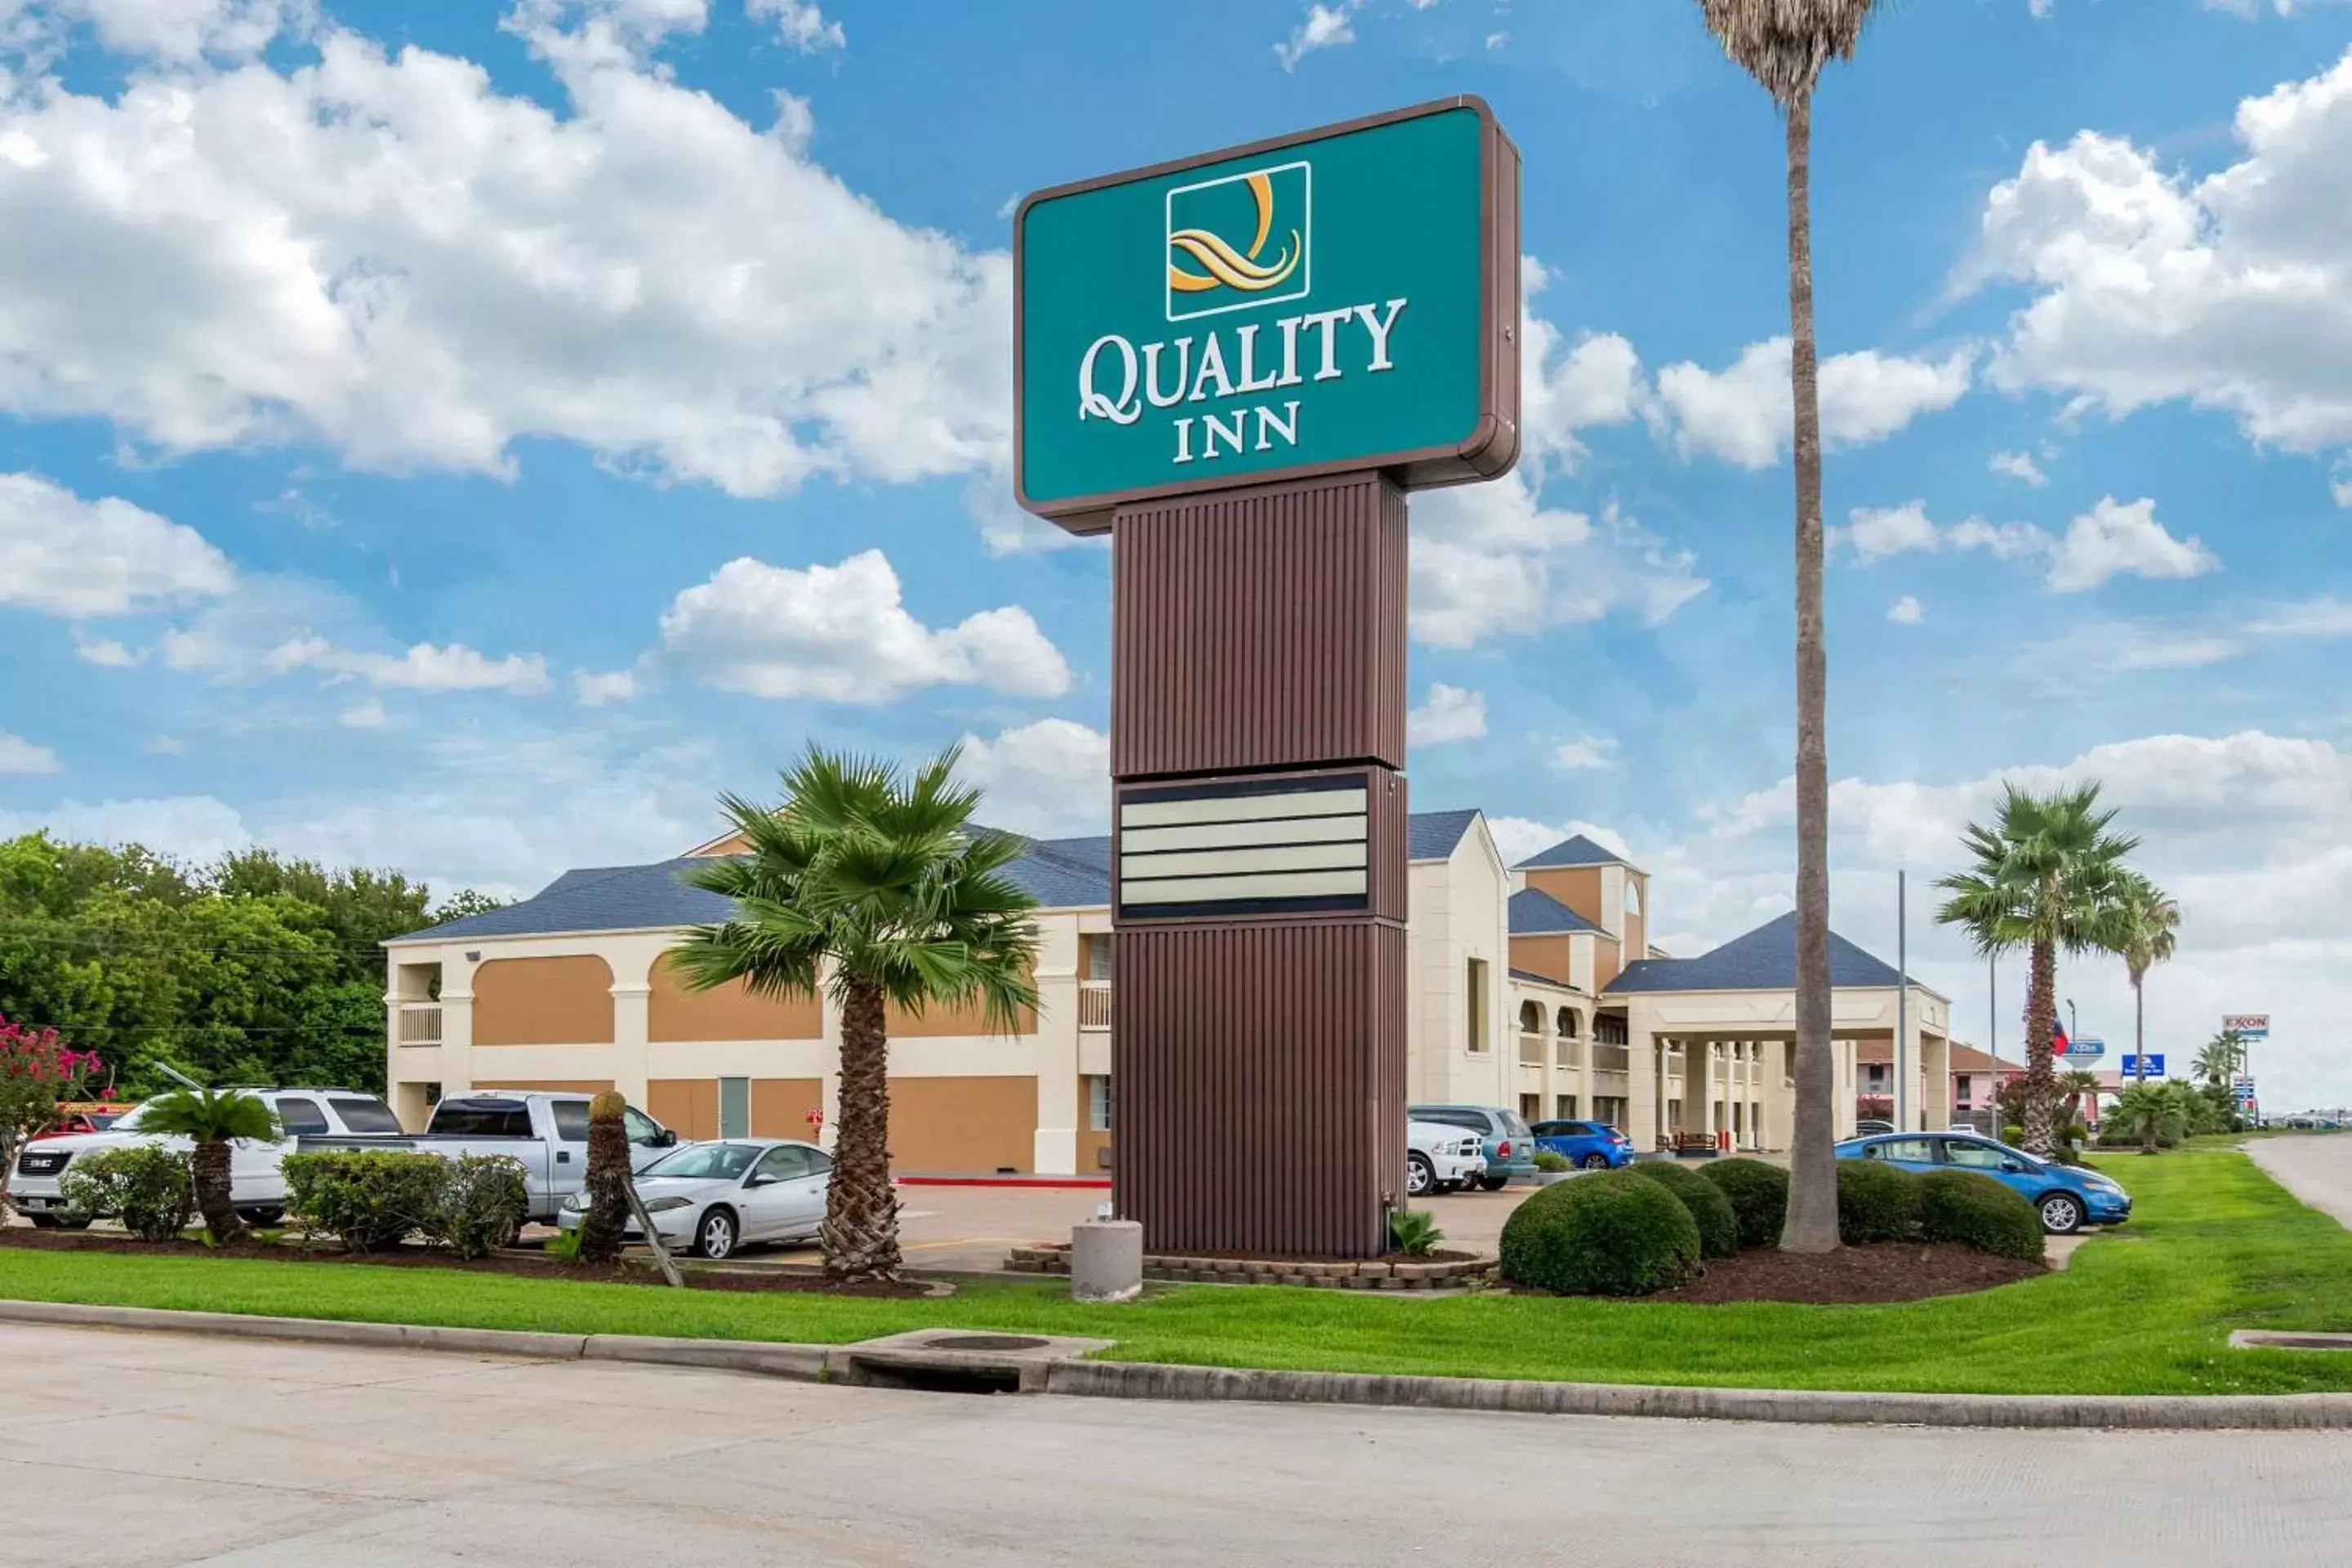 Property Building in Quality Inn Clute Freeport